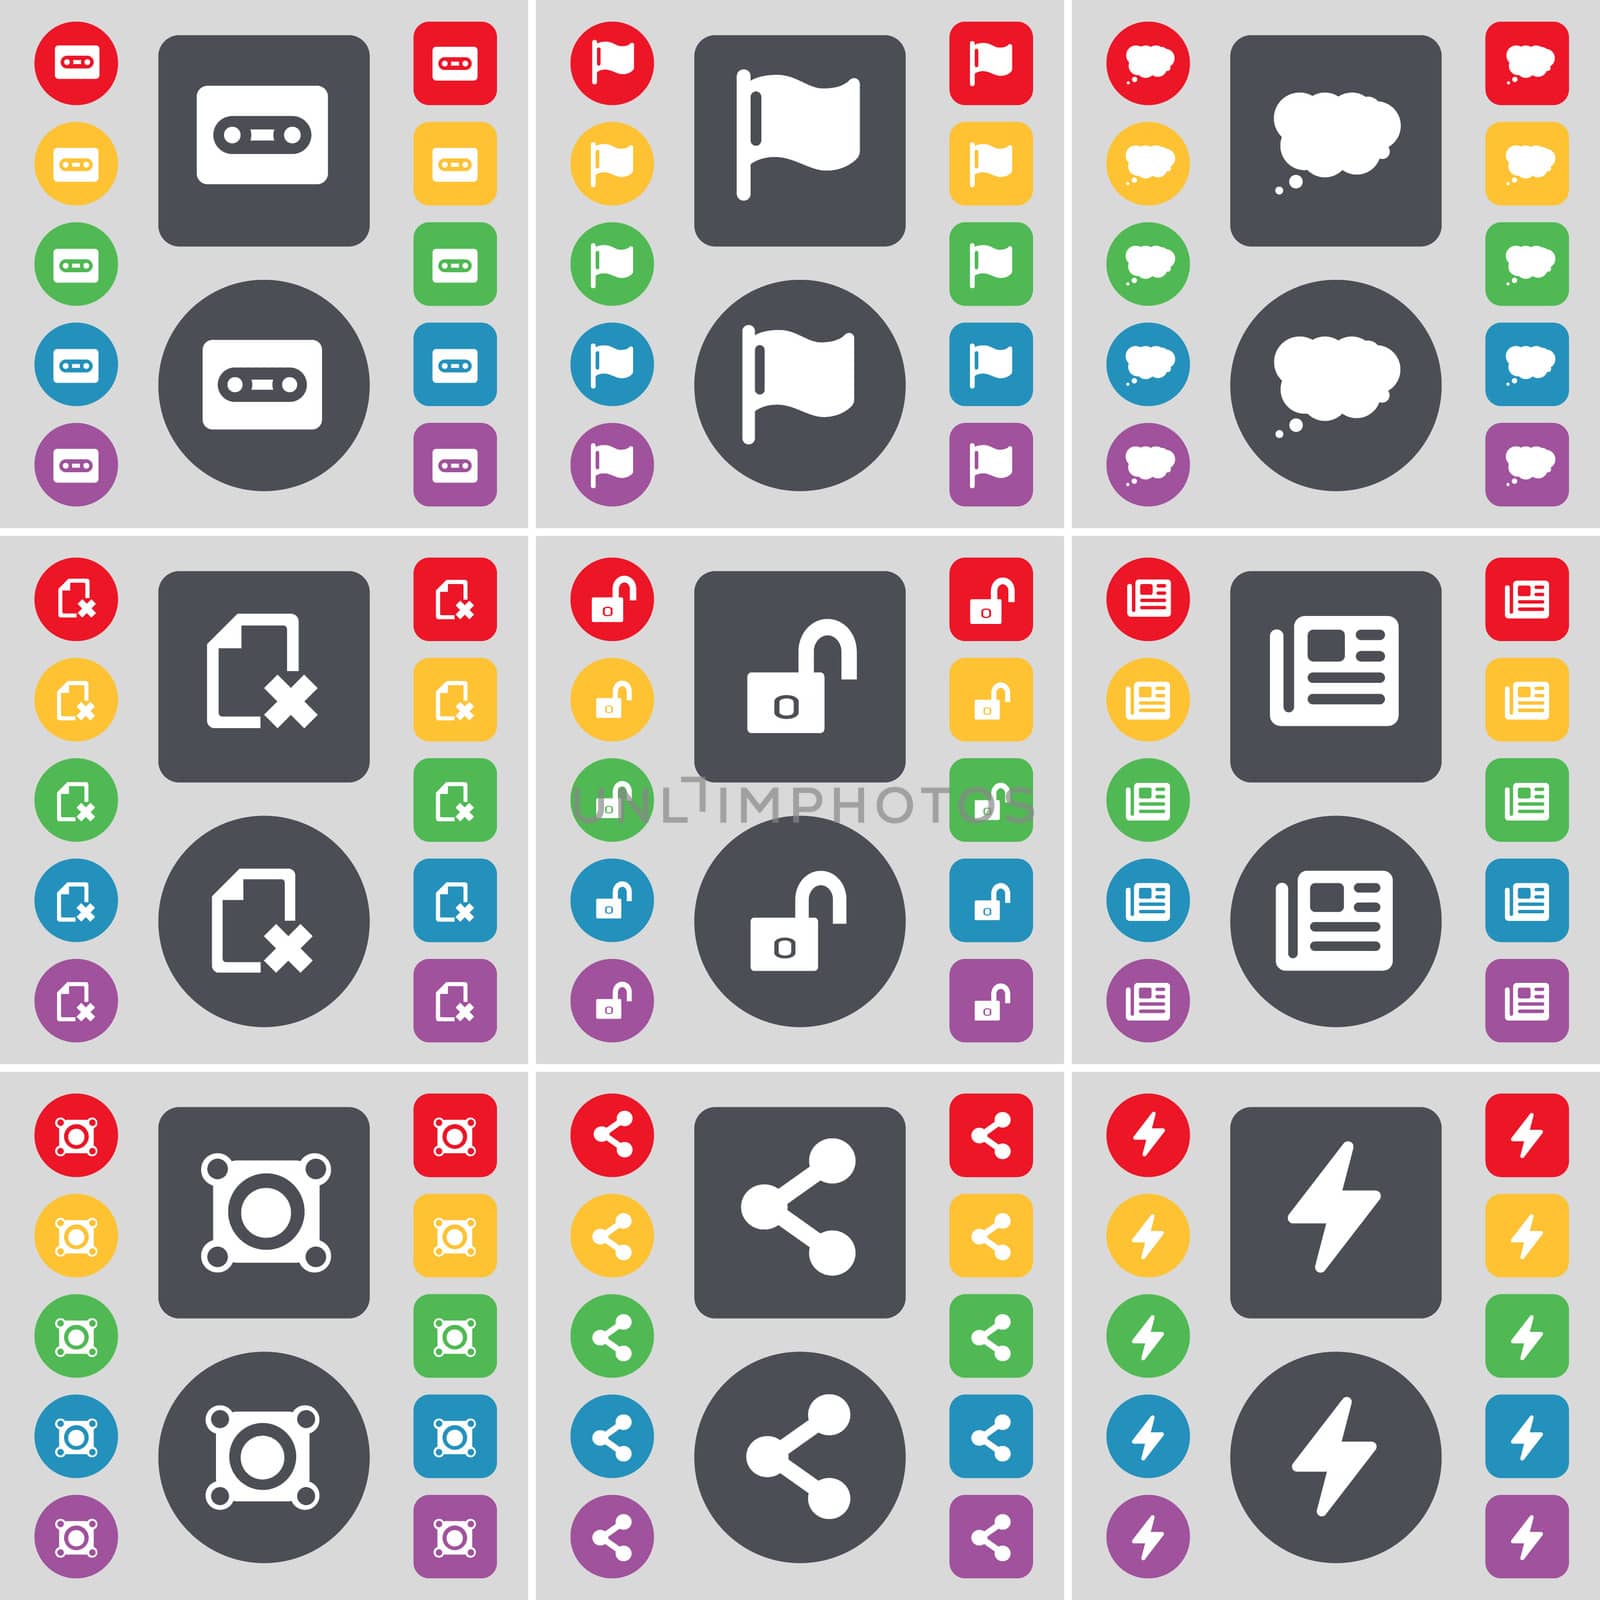 Cassette, Flag, Chat cloud, File, Lock, Newspaper, Speaker, Share, Flash icon symbol. A large set of flat, colored buttons for your design. illustration